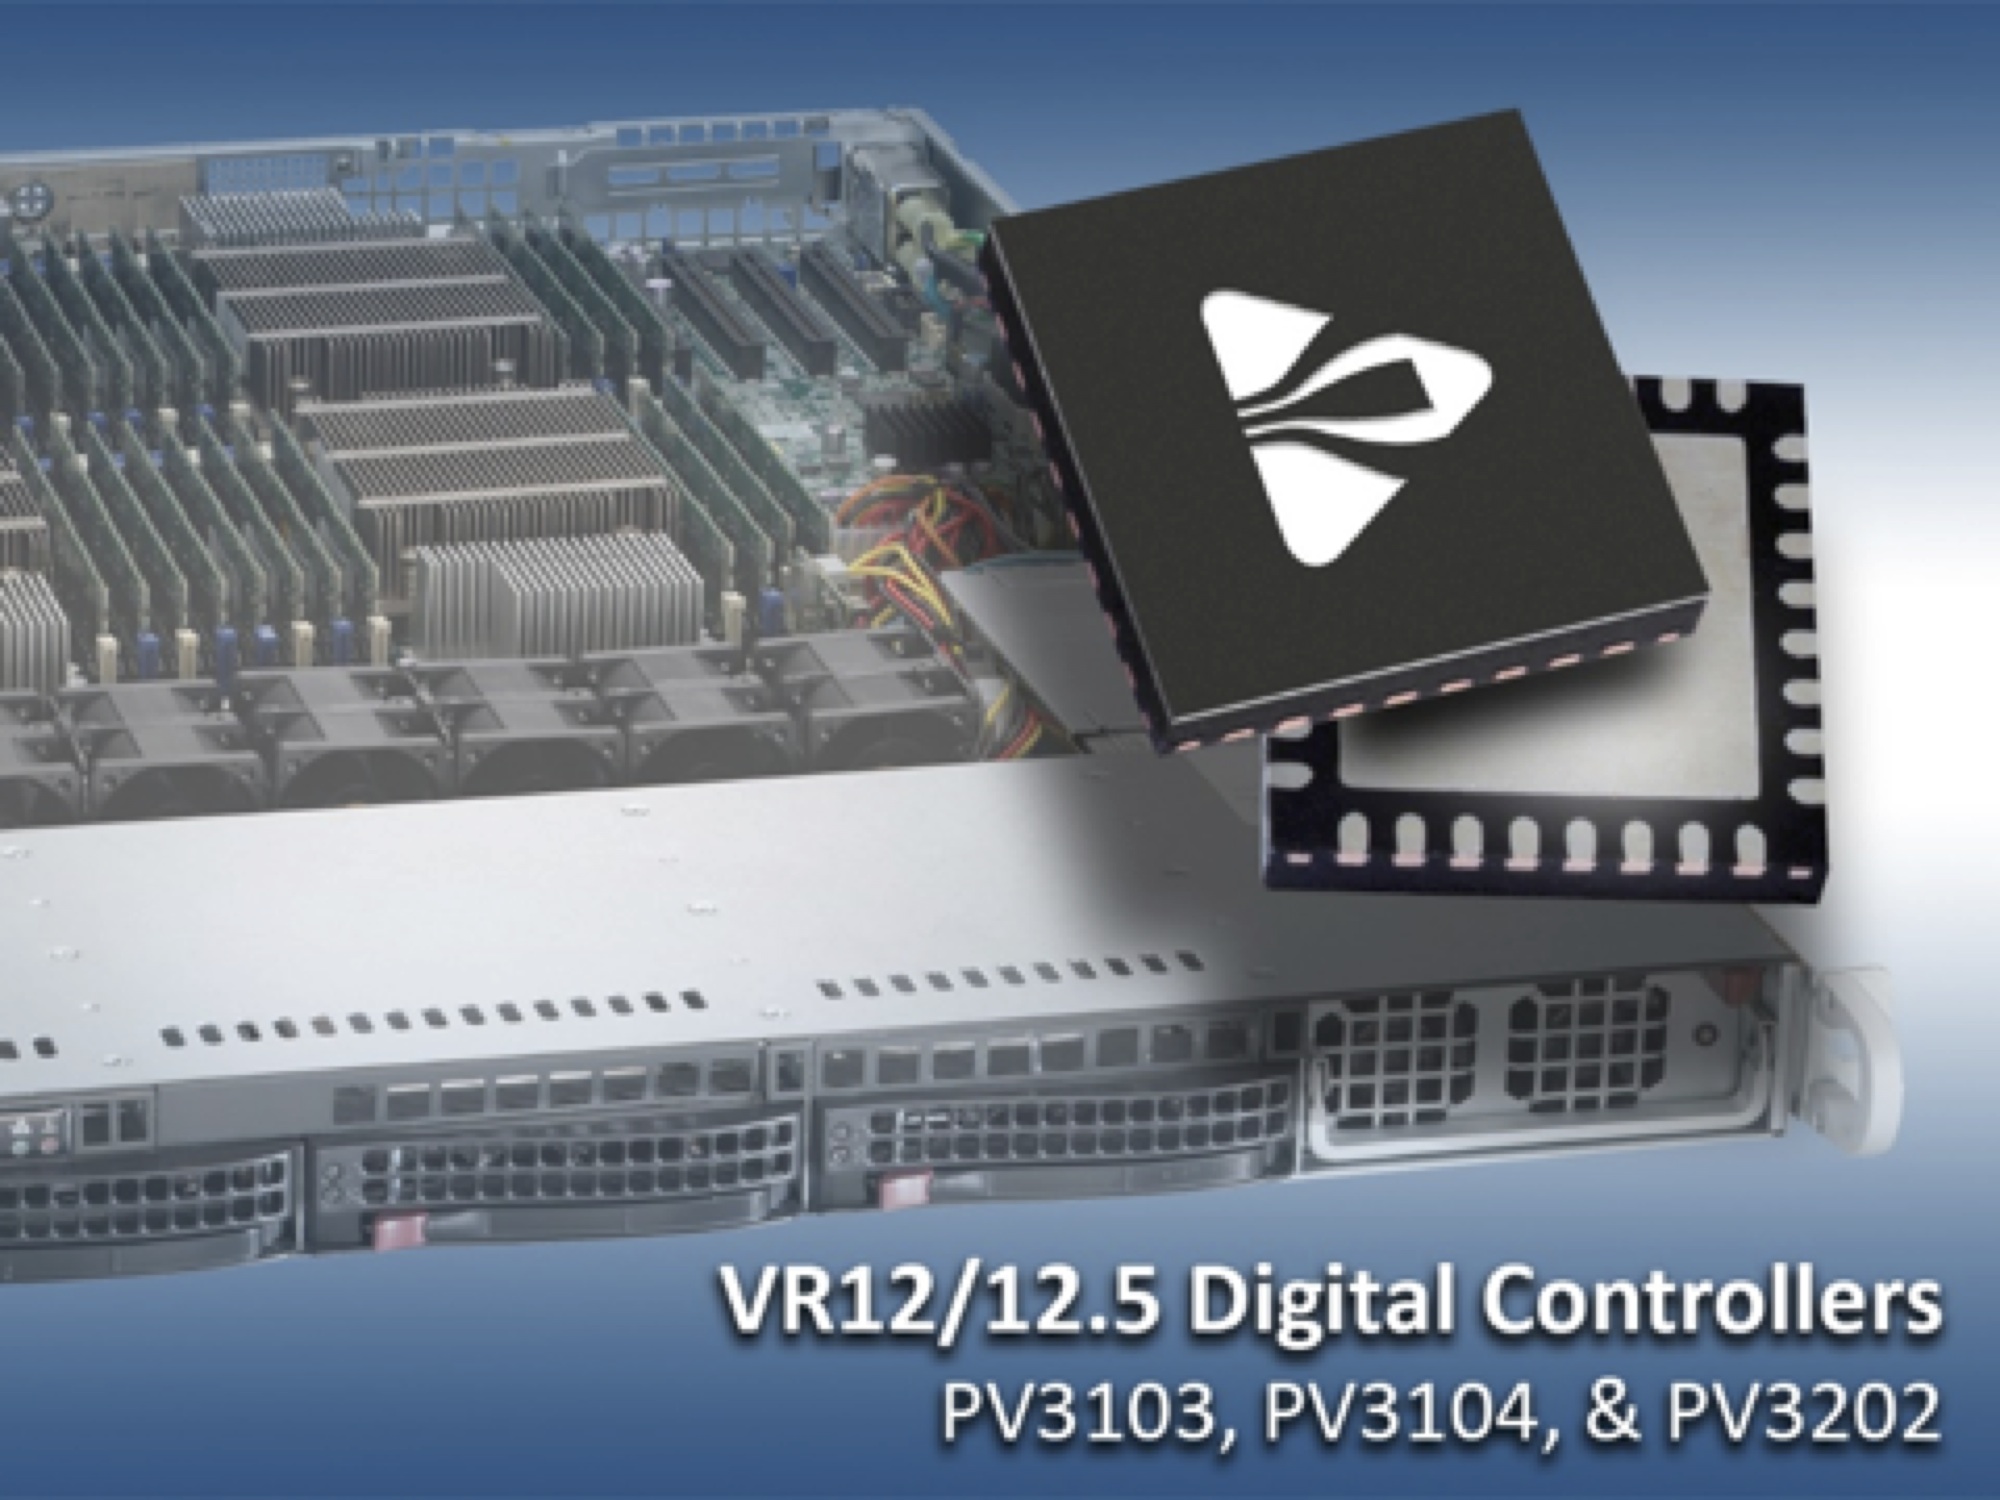 Powervation's digital controller family is VR12/12.5-compliant